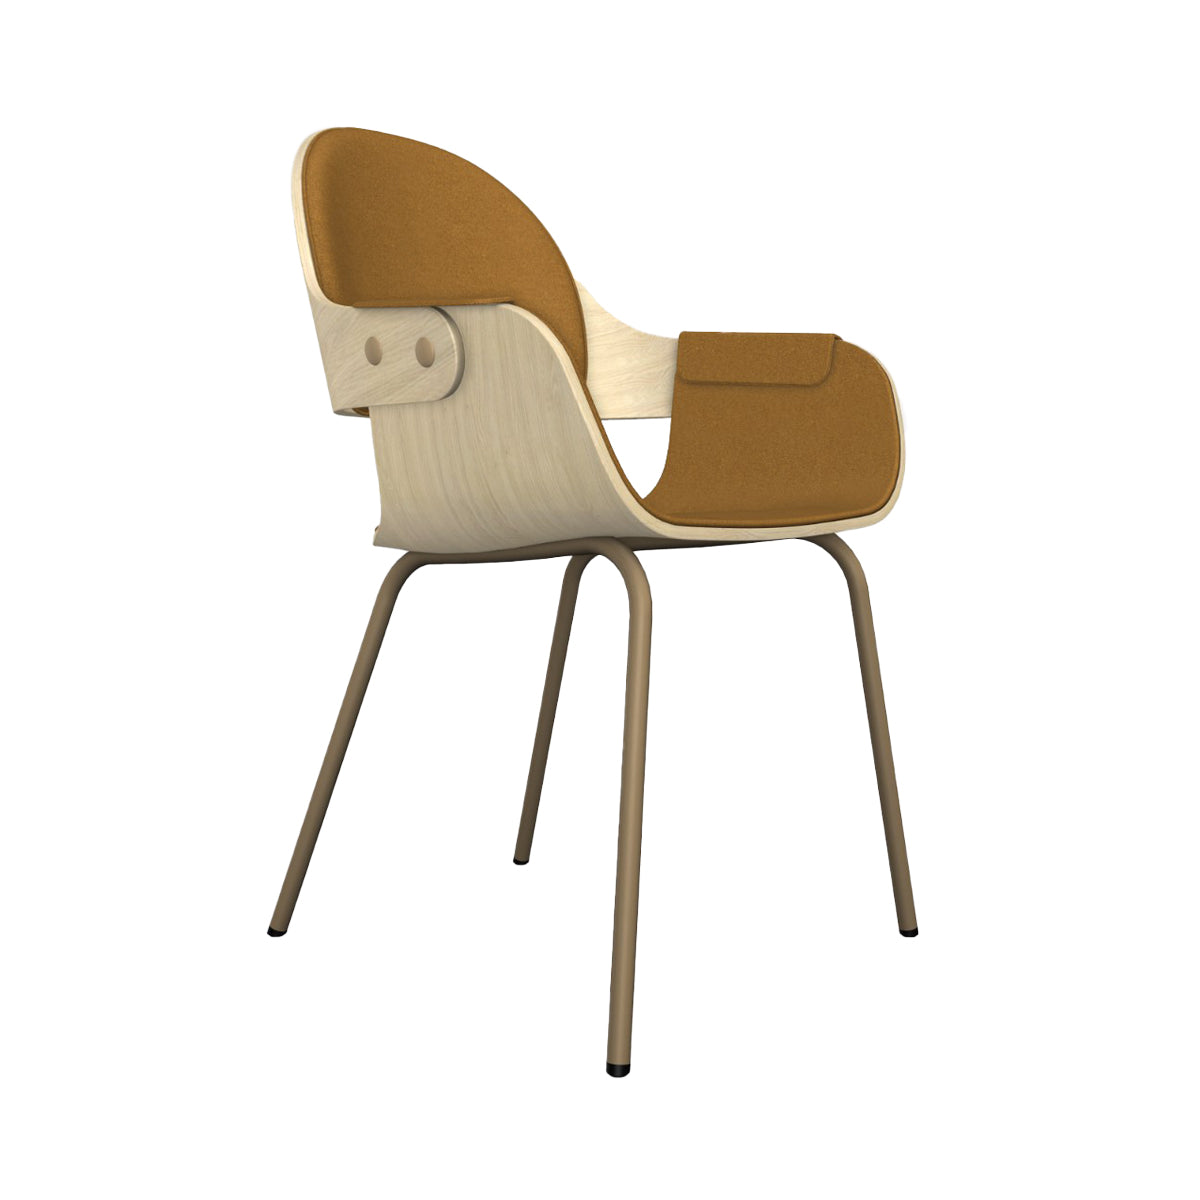 Showtime Nude Chair with Metal Base: Interior Seat + Armrest + Backrest Cushion + Natural Ash + Beige